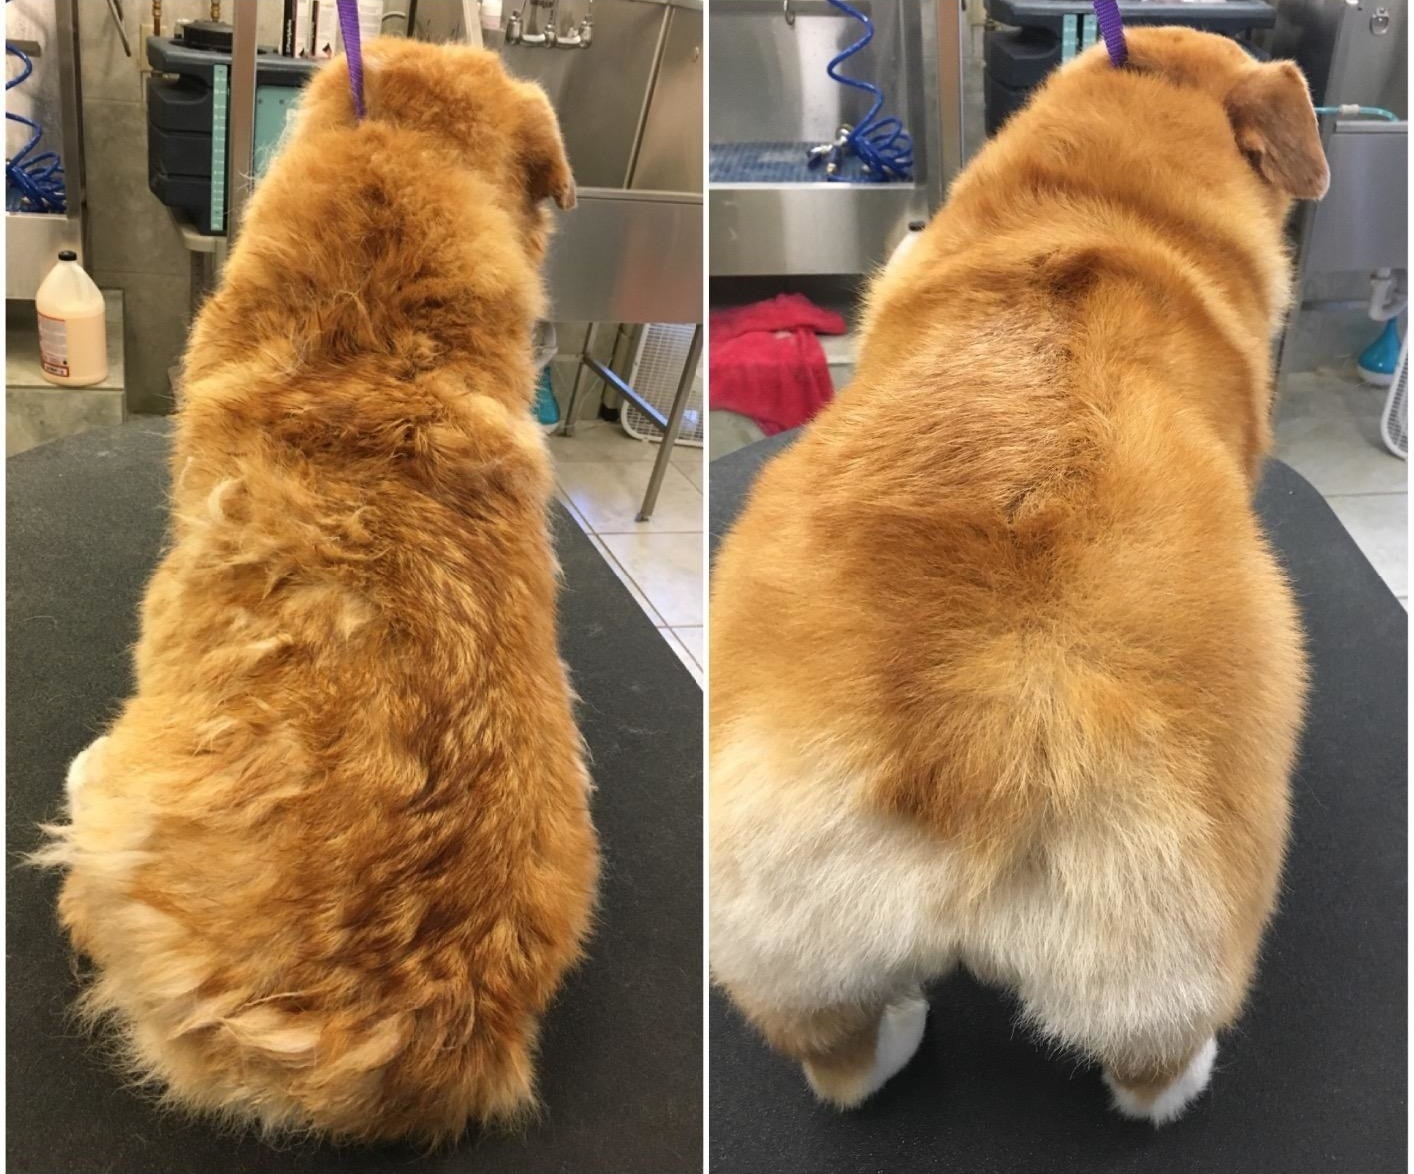 left: a dog with a shaggy coat right: dog with a nice uniform coat 